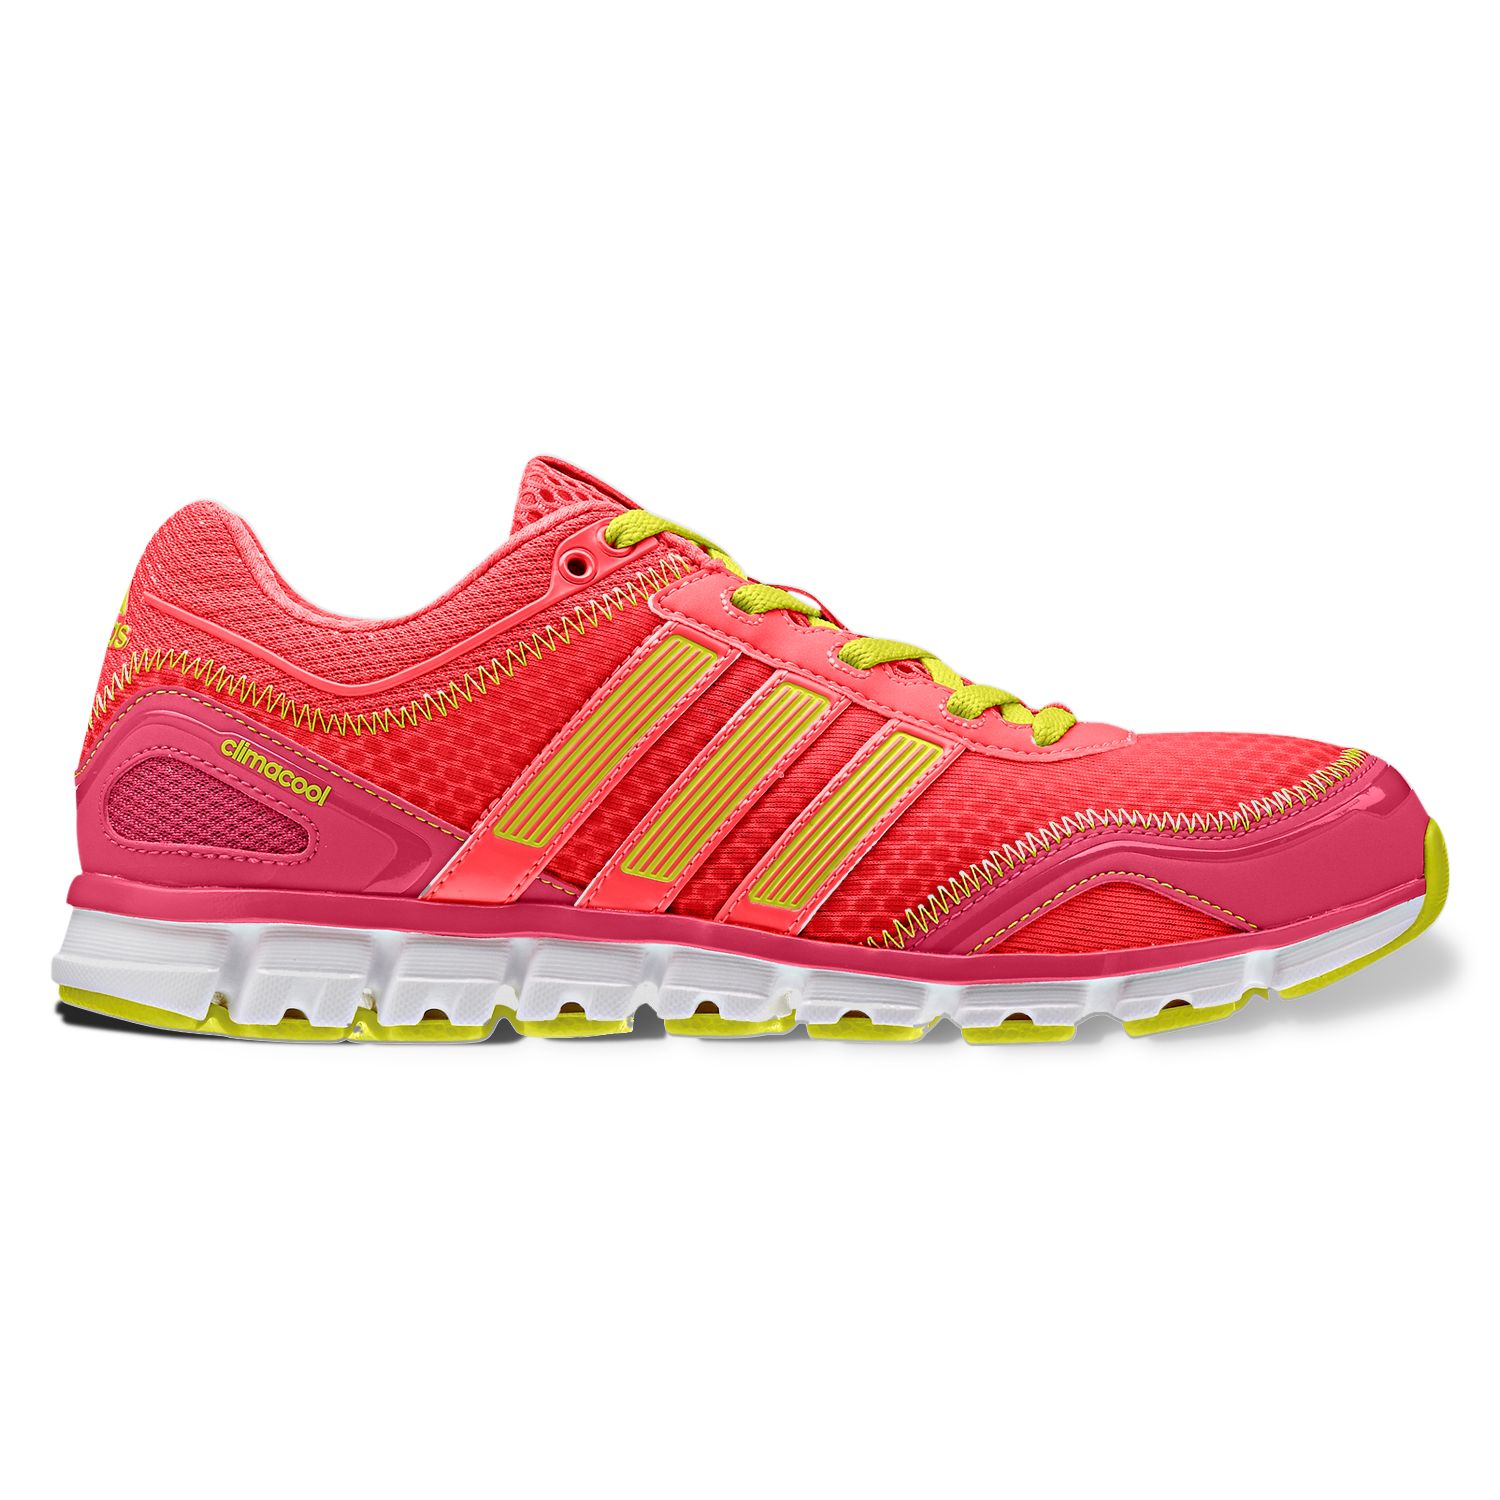 adidas climacool 5 running shoes 3.0